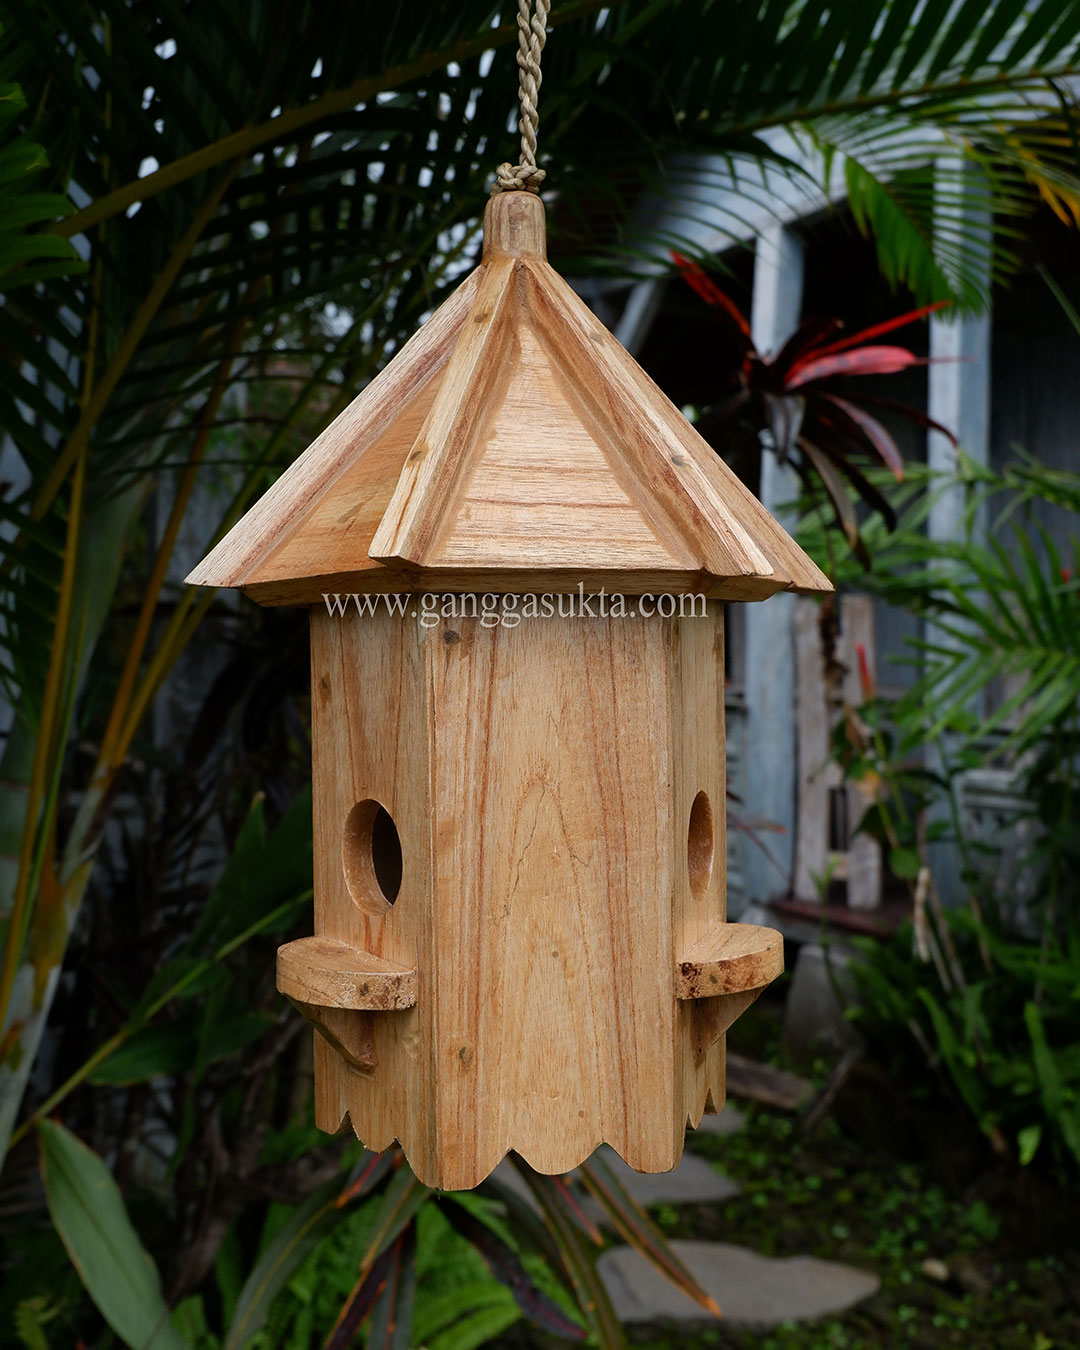 Bird House Box Natural Color Circus Theme for Hanging Outdoor Decoration Garden Balcony Decoration High Quality Wood